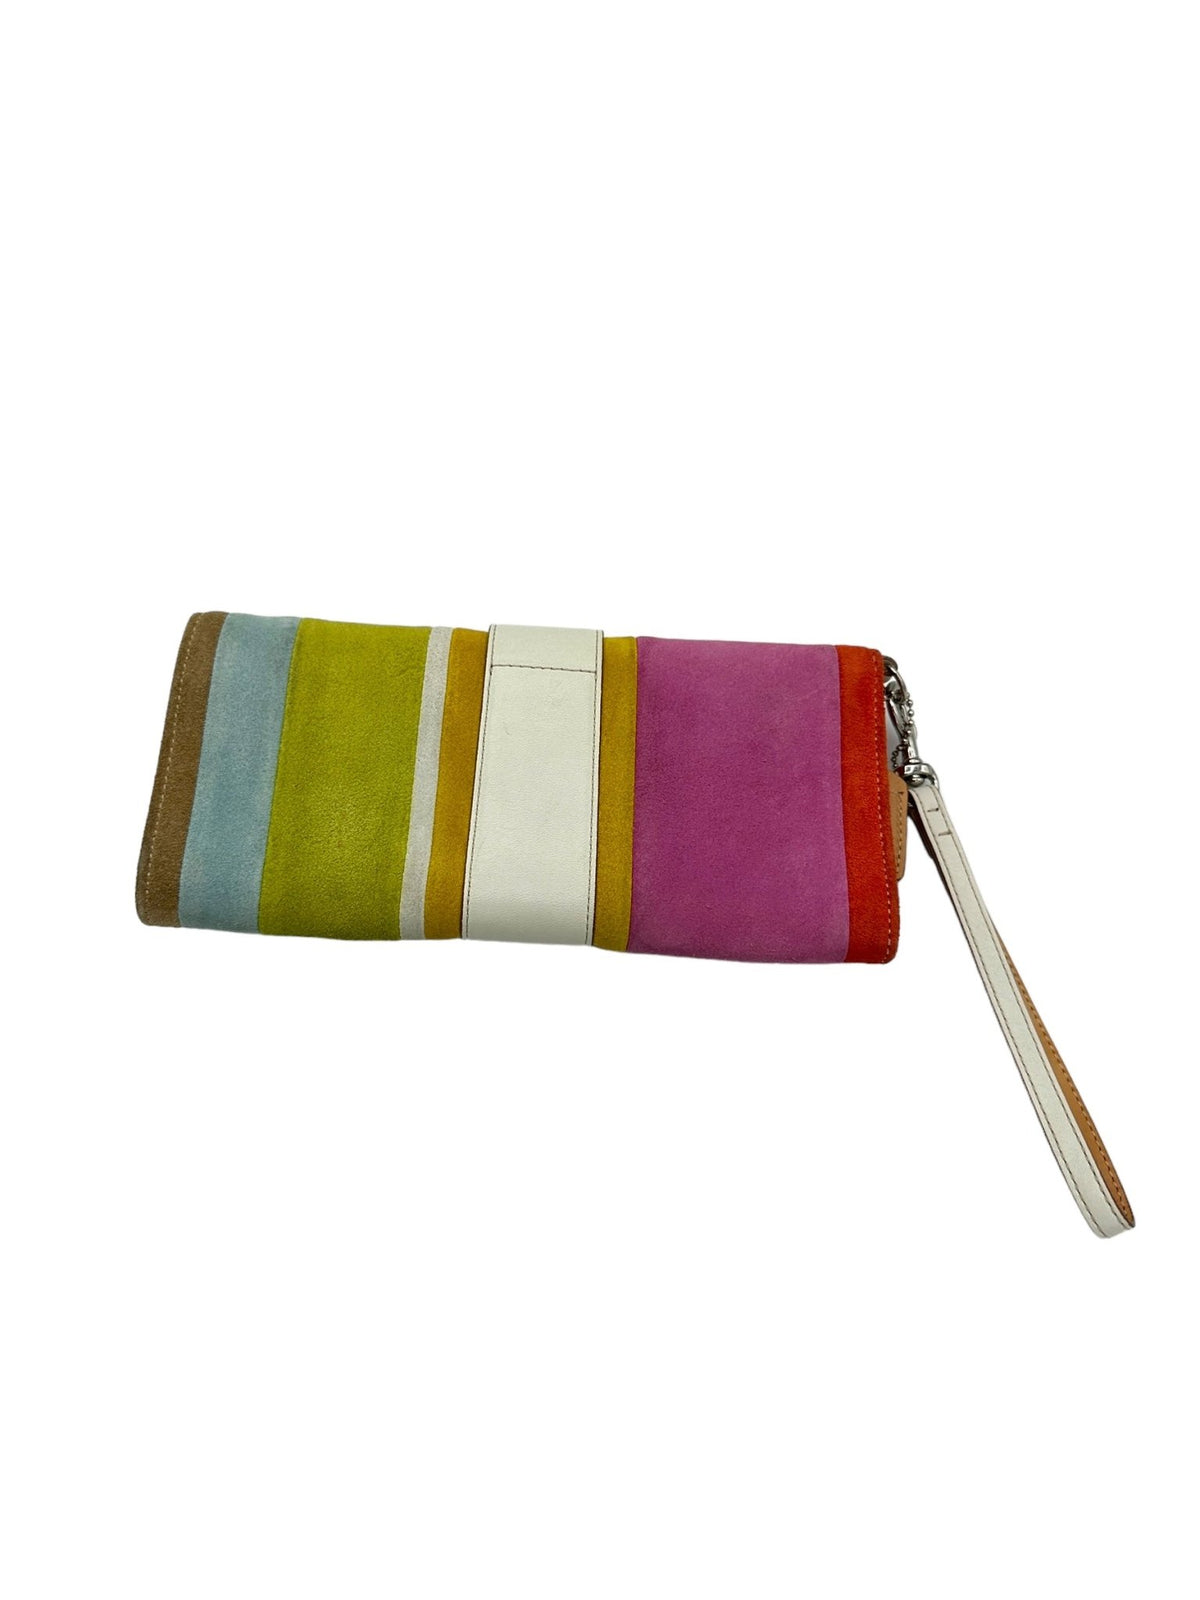 Coach Soho Bright Multicolor Stripe Suede Wallet Clutch 6744 - 24 Wishes Vintage Jewelry